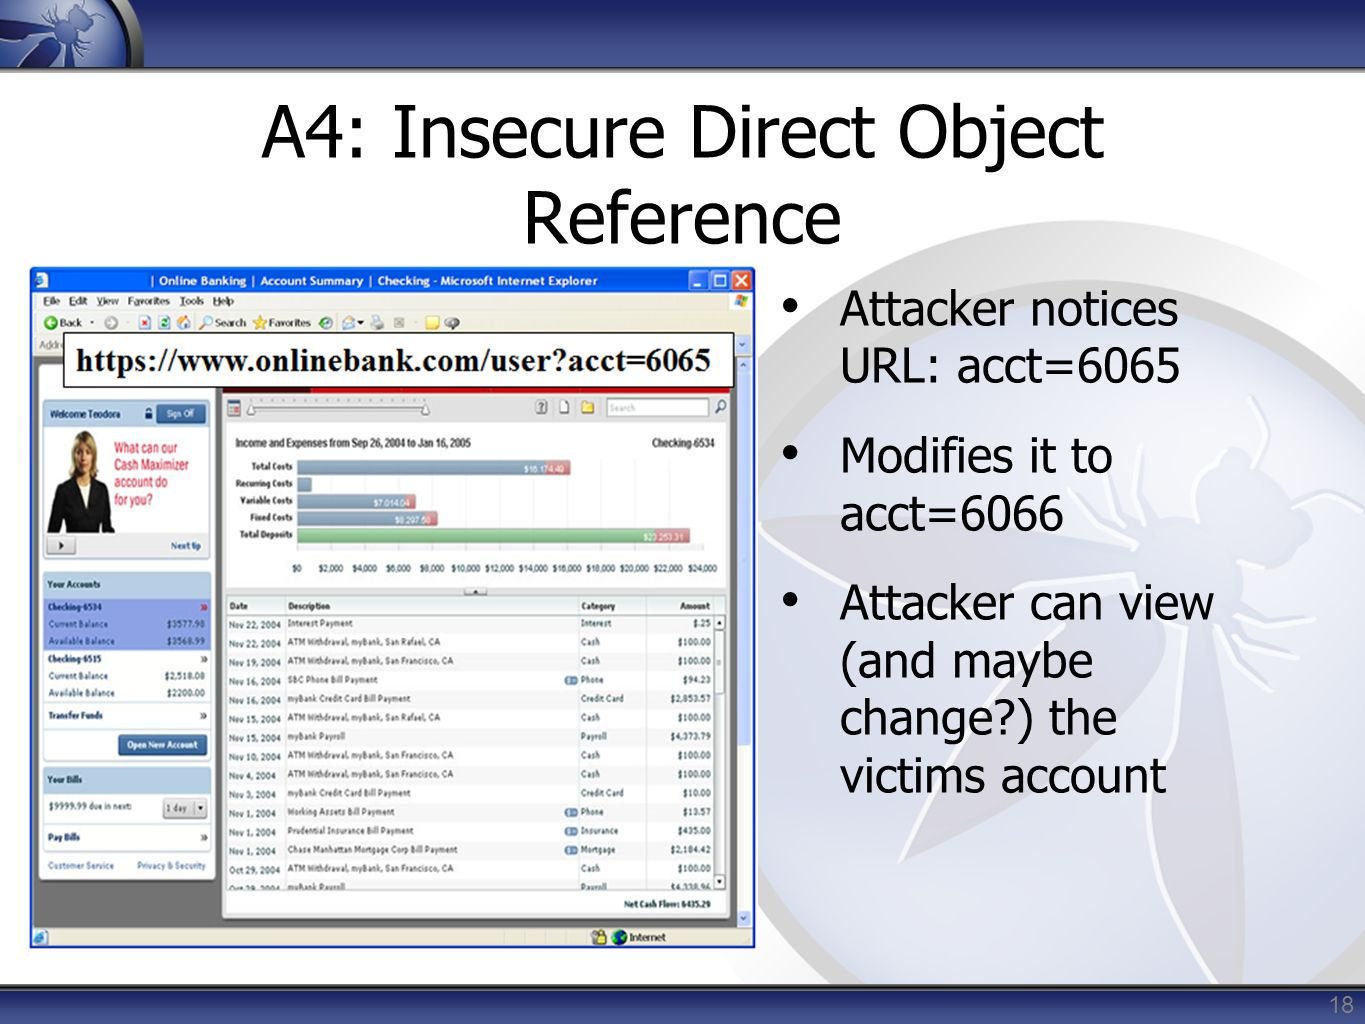 Insecure Direct Object References